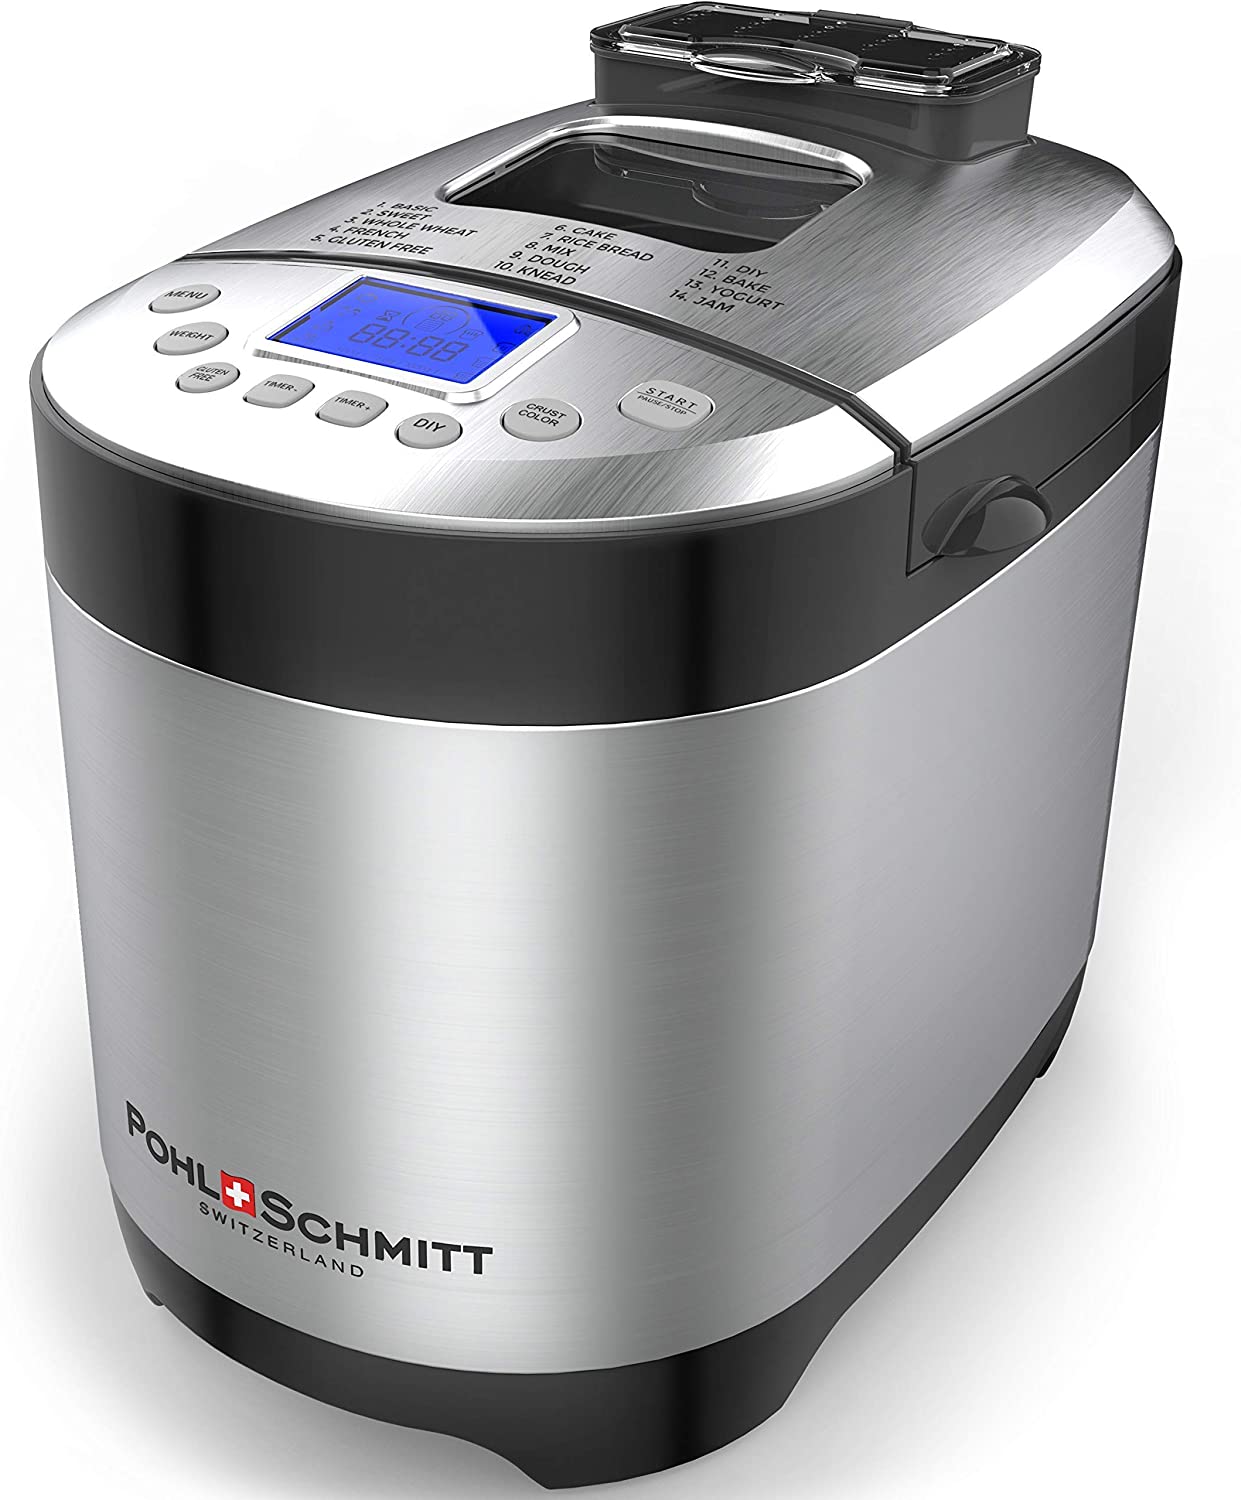 Pohl Schmitt Stainless Steel Bread Machine Bread Maker, 2LB 17-in-1, 14 Settings Incl Gluten Free & Fruit, Nut Dispenser, Nonstick Pan, 3 Loaf Sizes 3 Crust Colors, Keep Warm, and Recipes - image 1 of 7